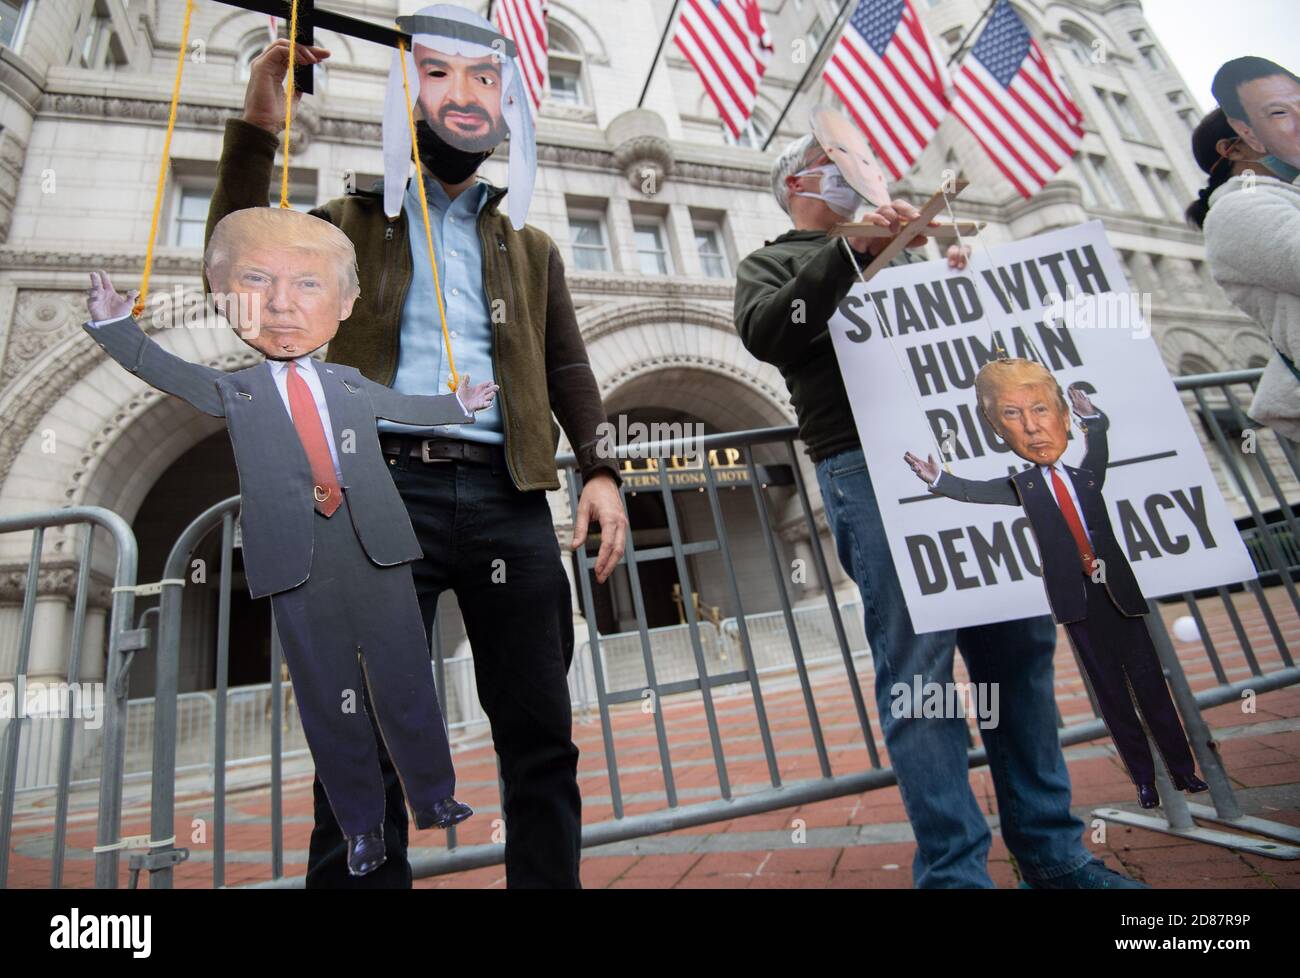 Washington, United States. 27th Oct, 2020. Protesters wearing masks of Crown Prince of Saudi Arabia.Mohammed bin Salman Russian (L) and Russian President Vladimir Putin hold marionette puppets of President Donald Trump as they participate in a demonstration sponsored by various humans rights groups protesting what they say is Trump's inappropriate relationships with autocrats and his manipulation of the Republican Party, at the Trump Tower in Washington, DC on Tuesday, October 27, 2020. Photo by Kevin Dietsch/UPI Credit: UPI/Alamy Live News Stock Photo